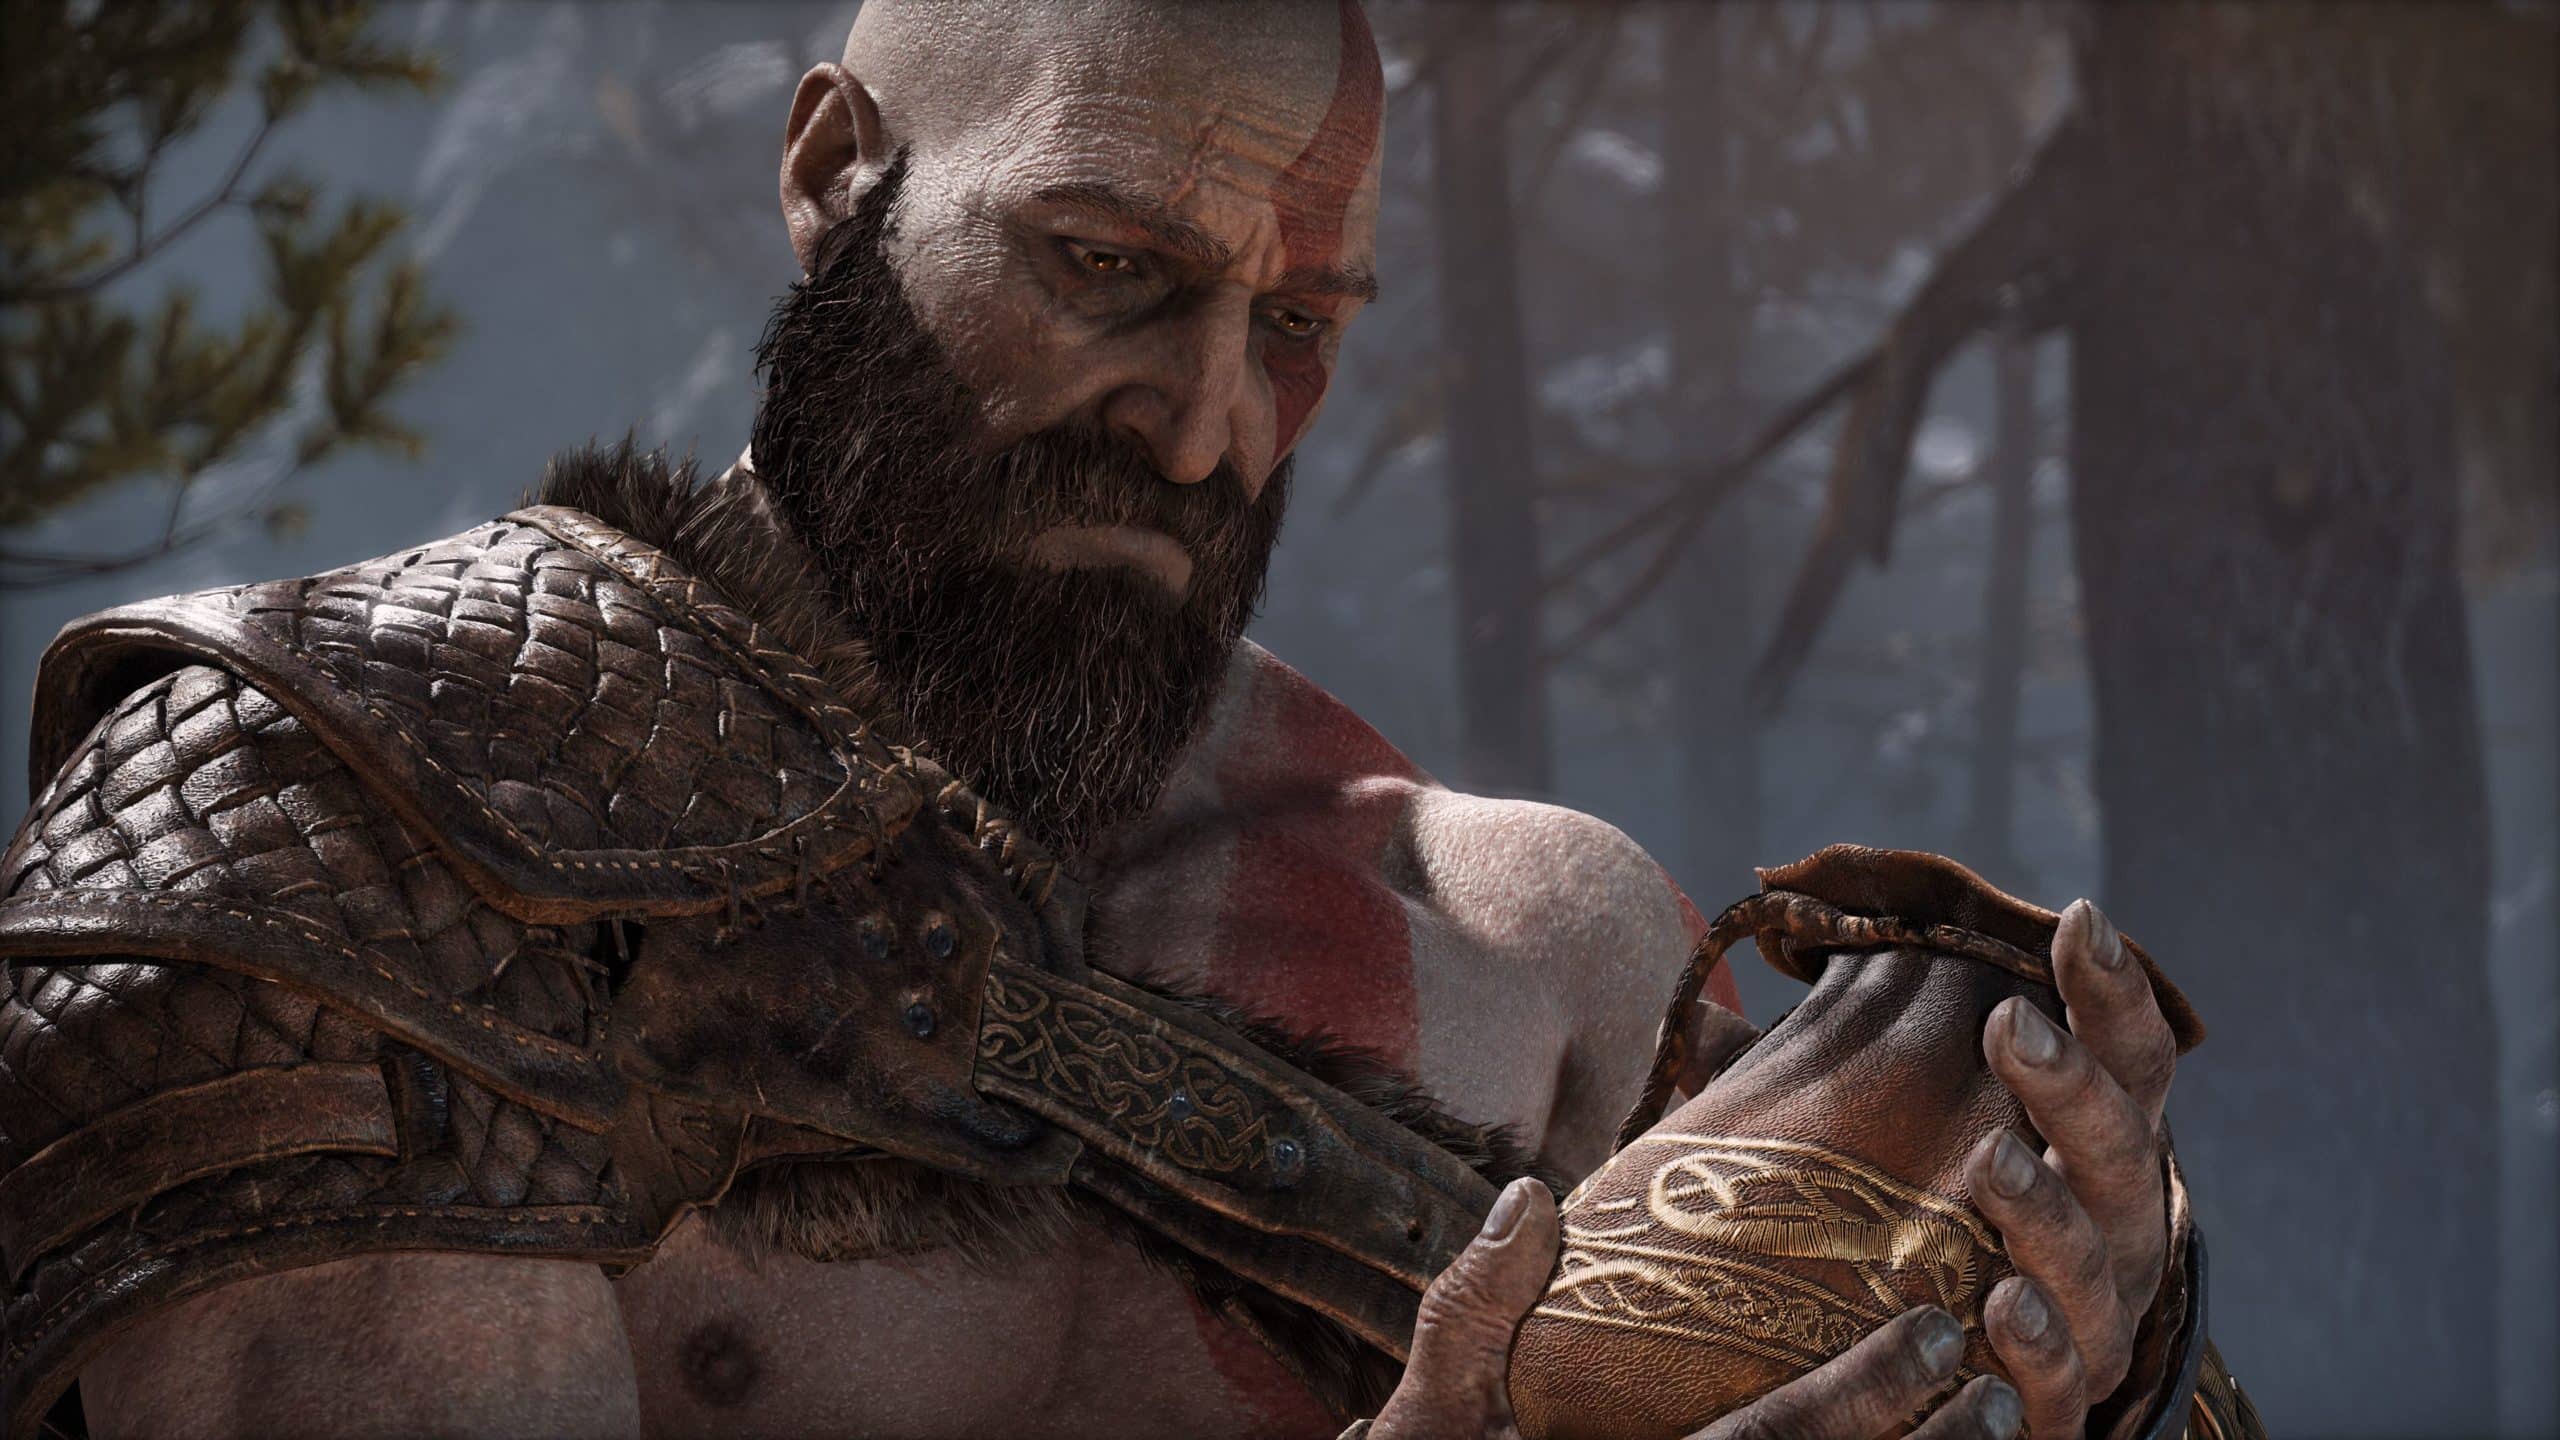 God of War Ragnarok : Will it Come to PC? - The SportsRush